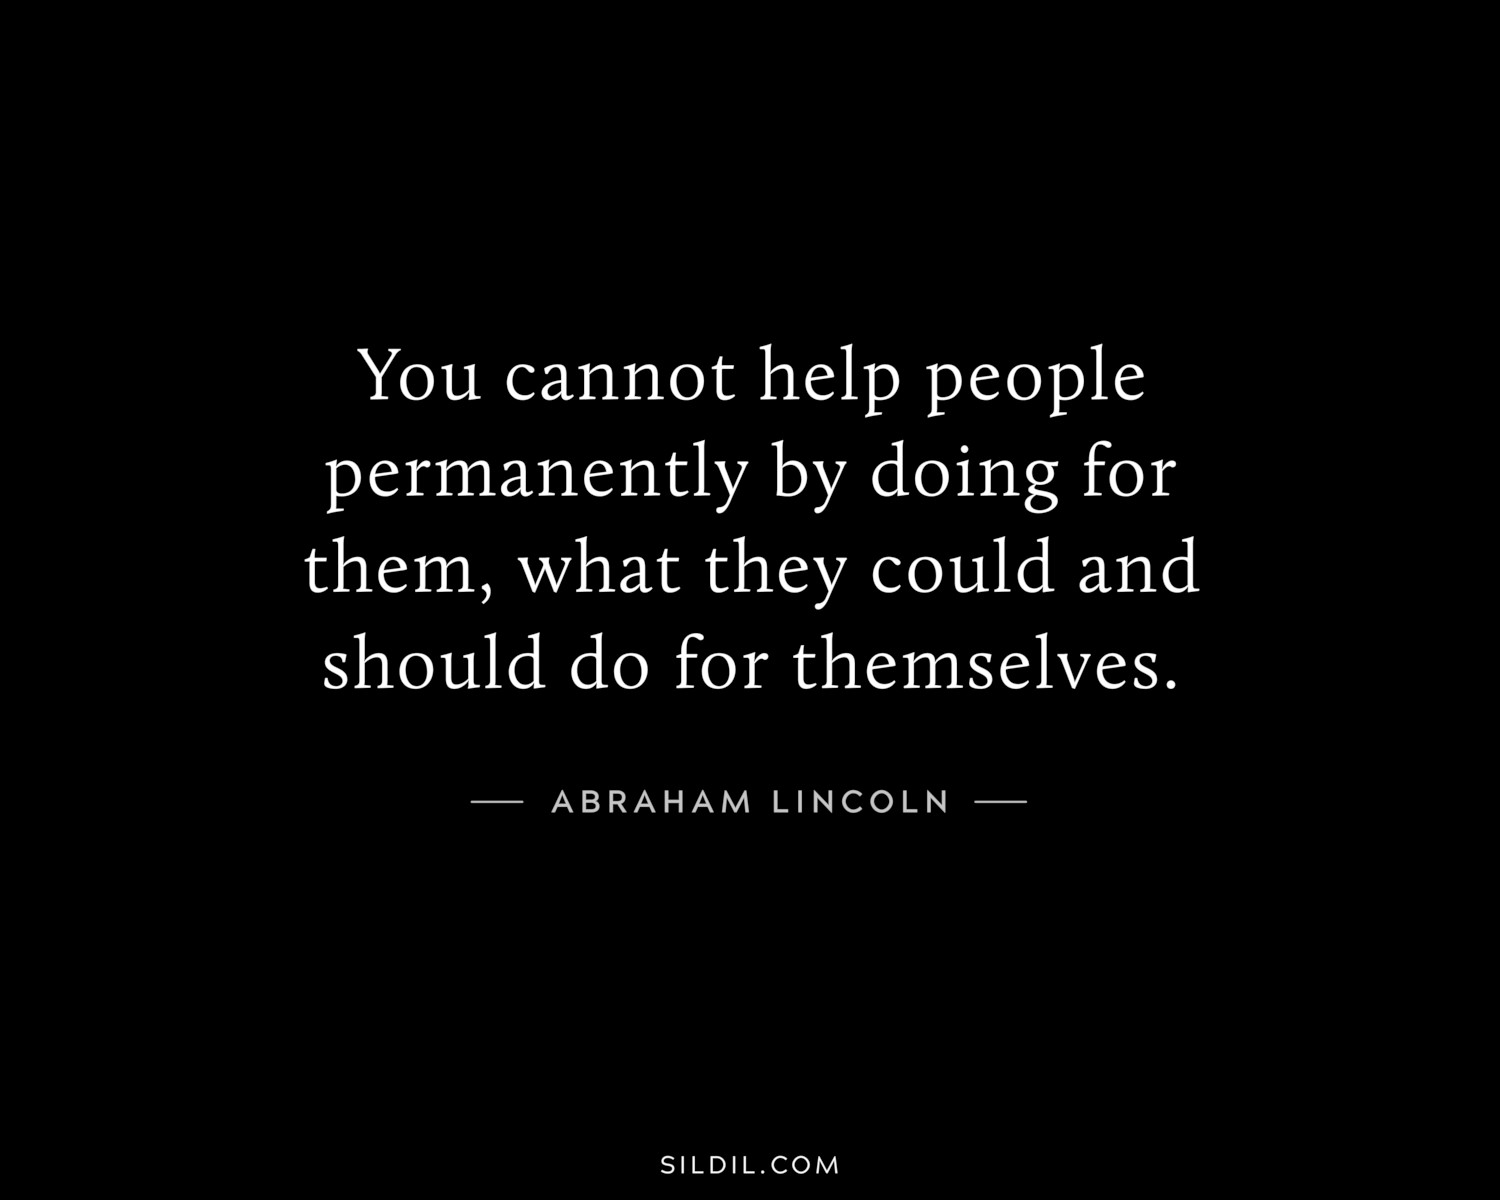 You cannot help people permanently by doing for them, what they could and should do for themselves.